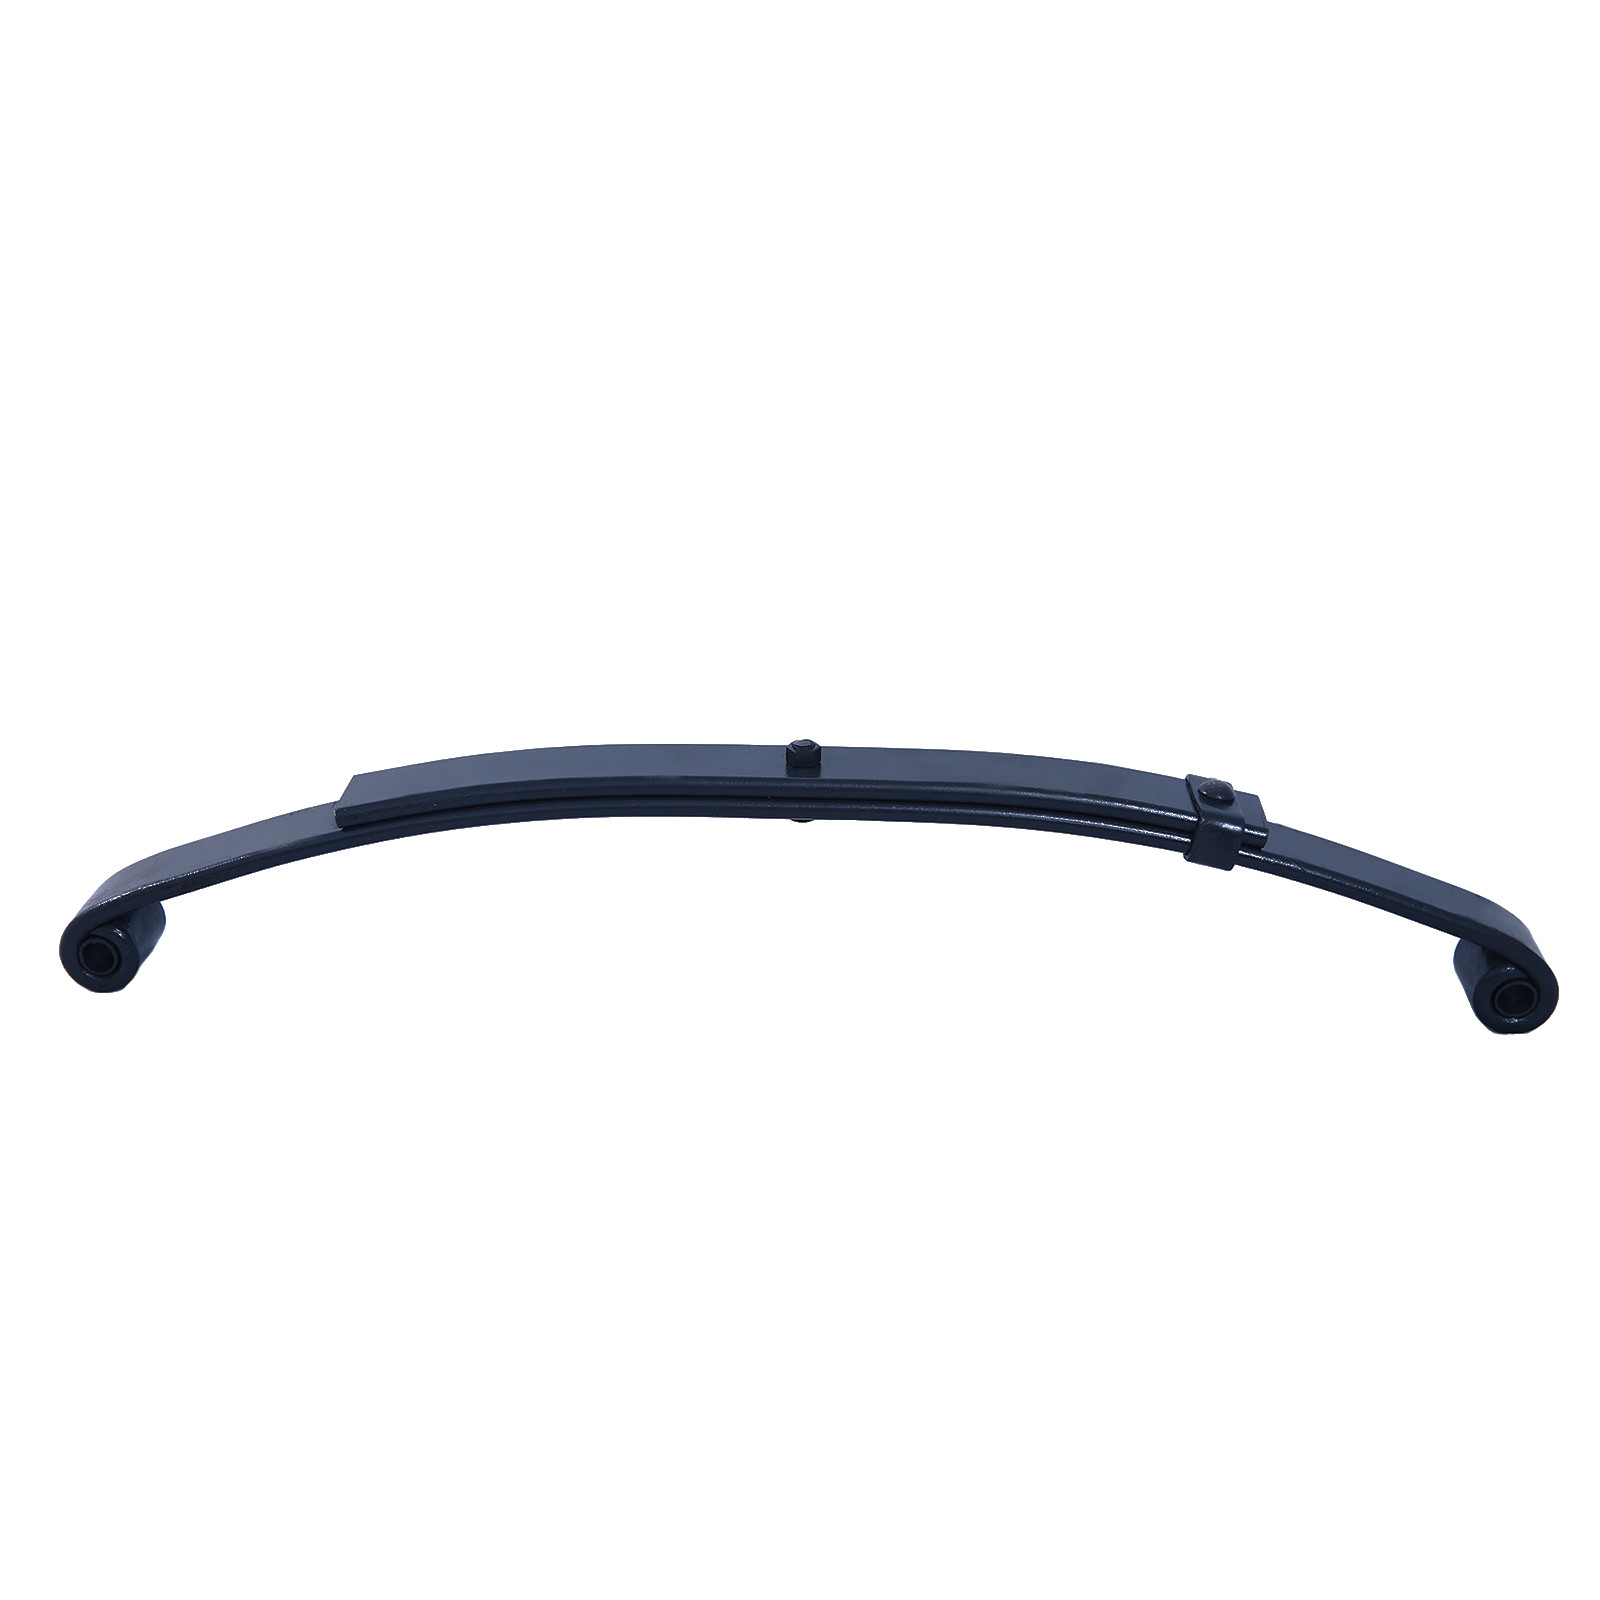 Auto Parts 44.5×8-2 Double Eye Trailer Leaf Springs